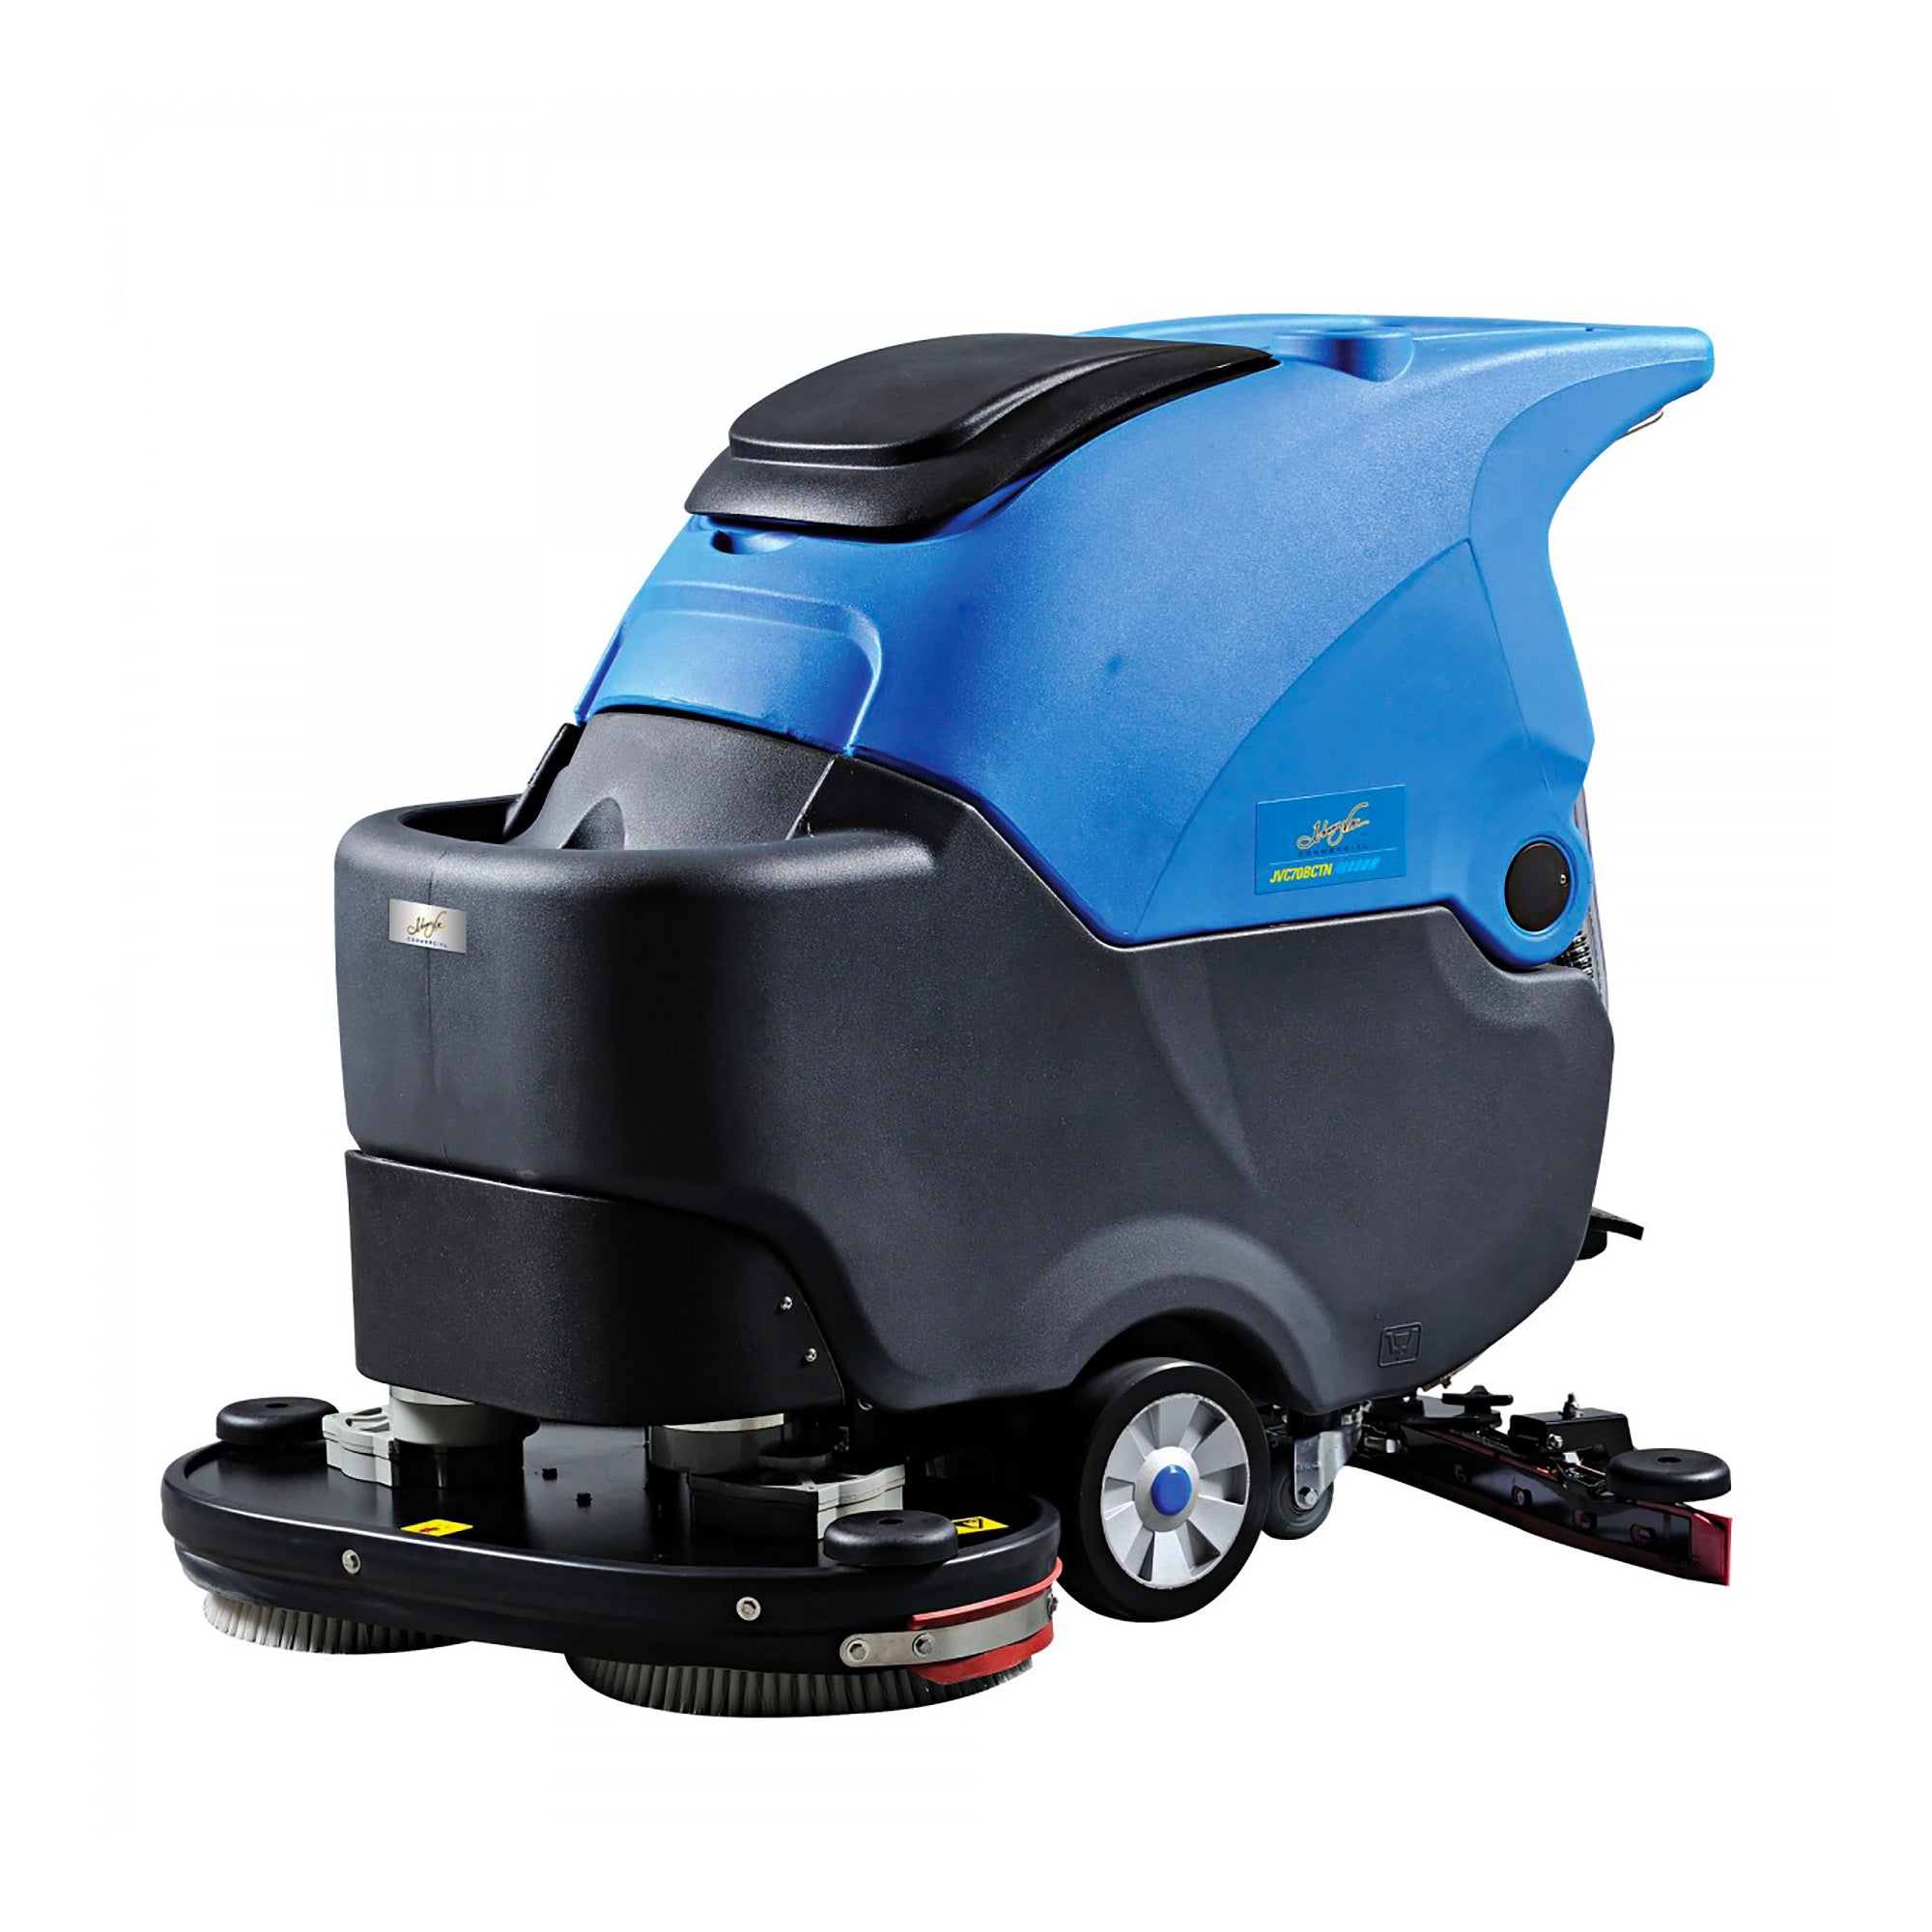 Johnny Vac JVC70BCTN Autoscrubber with Traction and 28" Cleaning Path